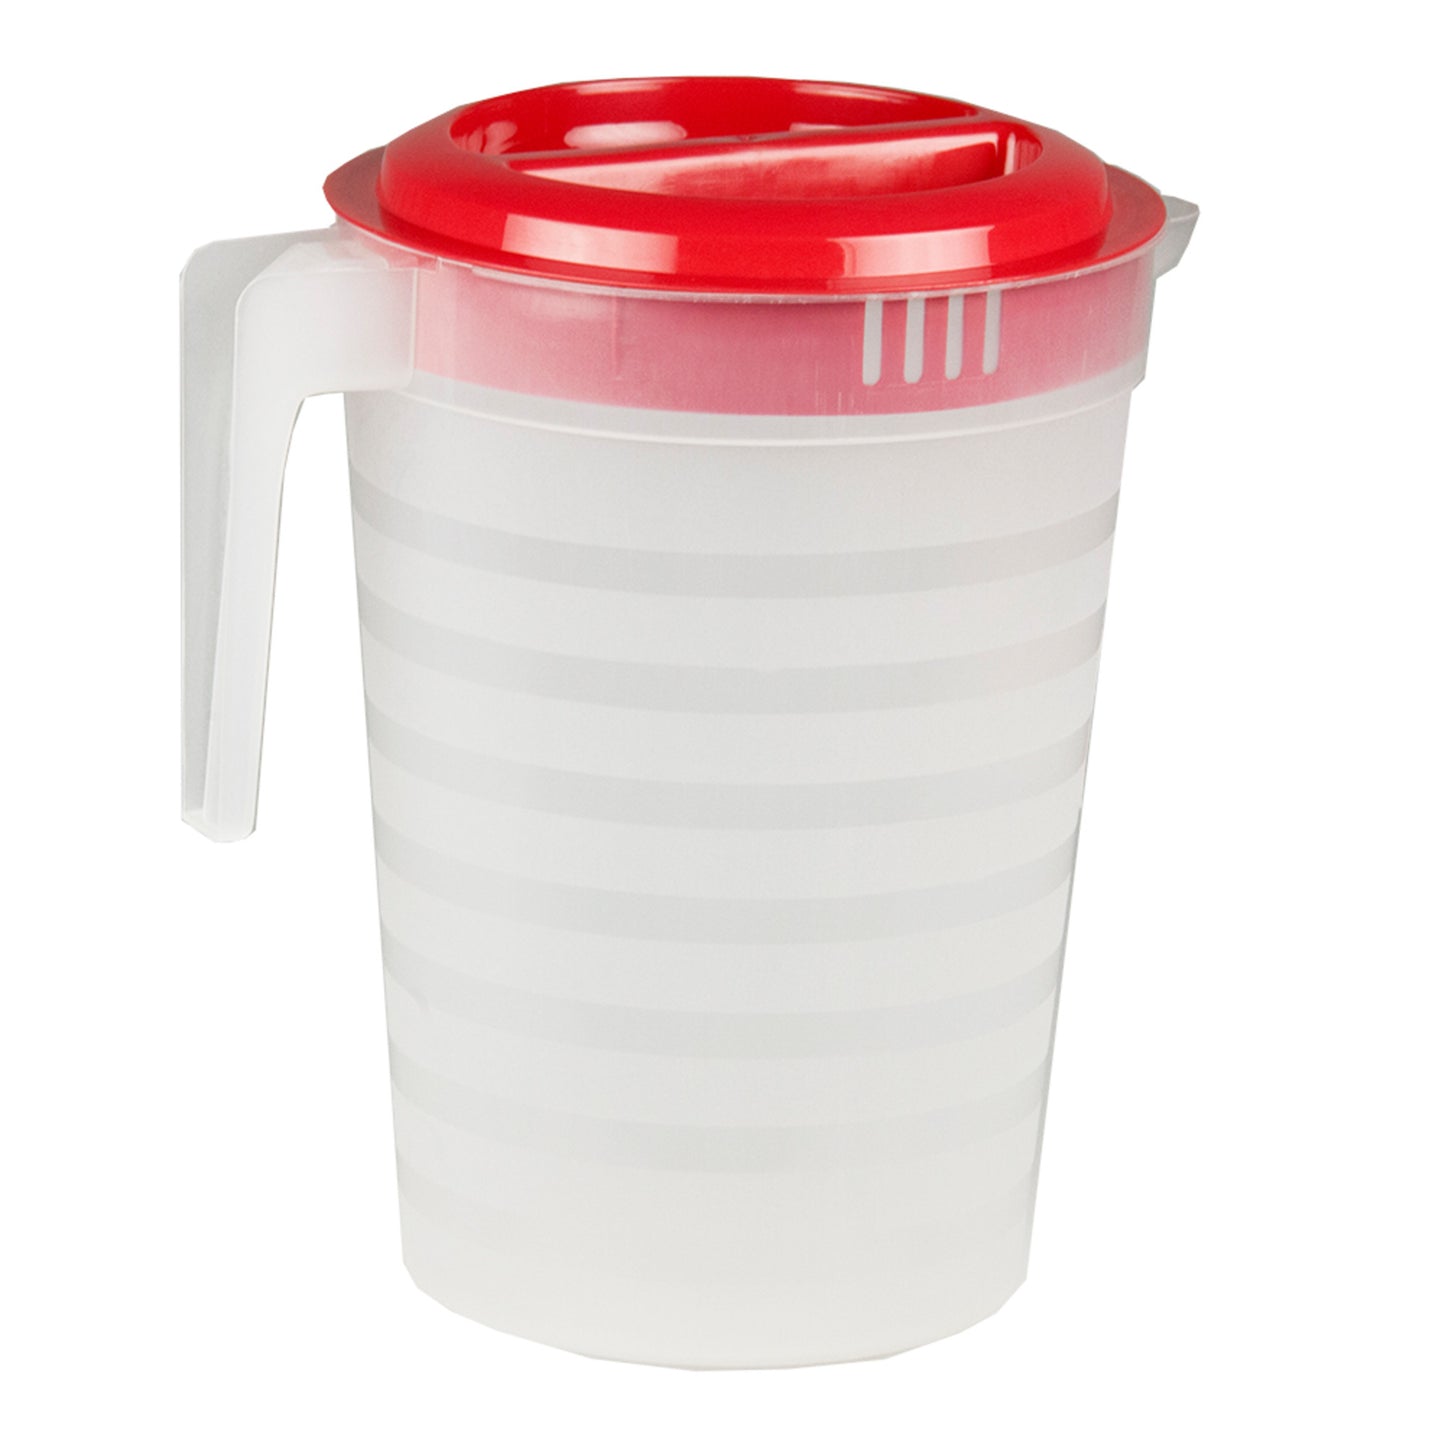 Home Basics Plastic Drink Pitcher - Red